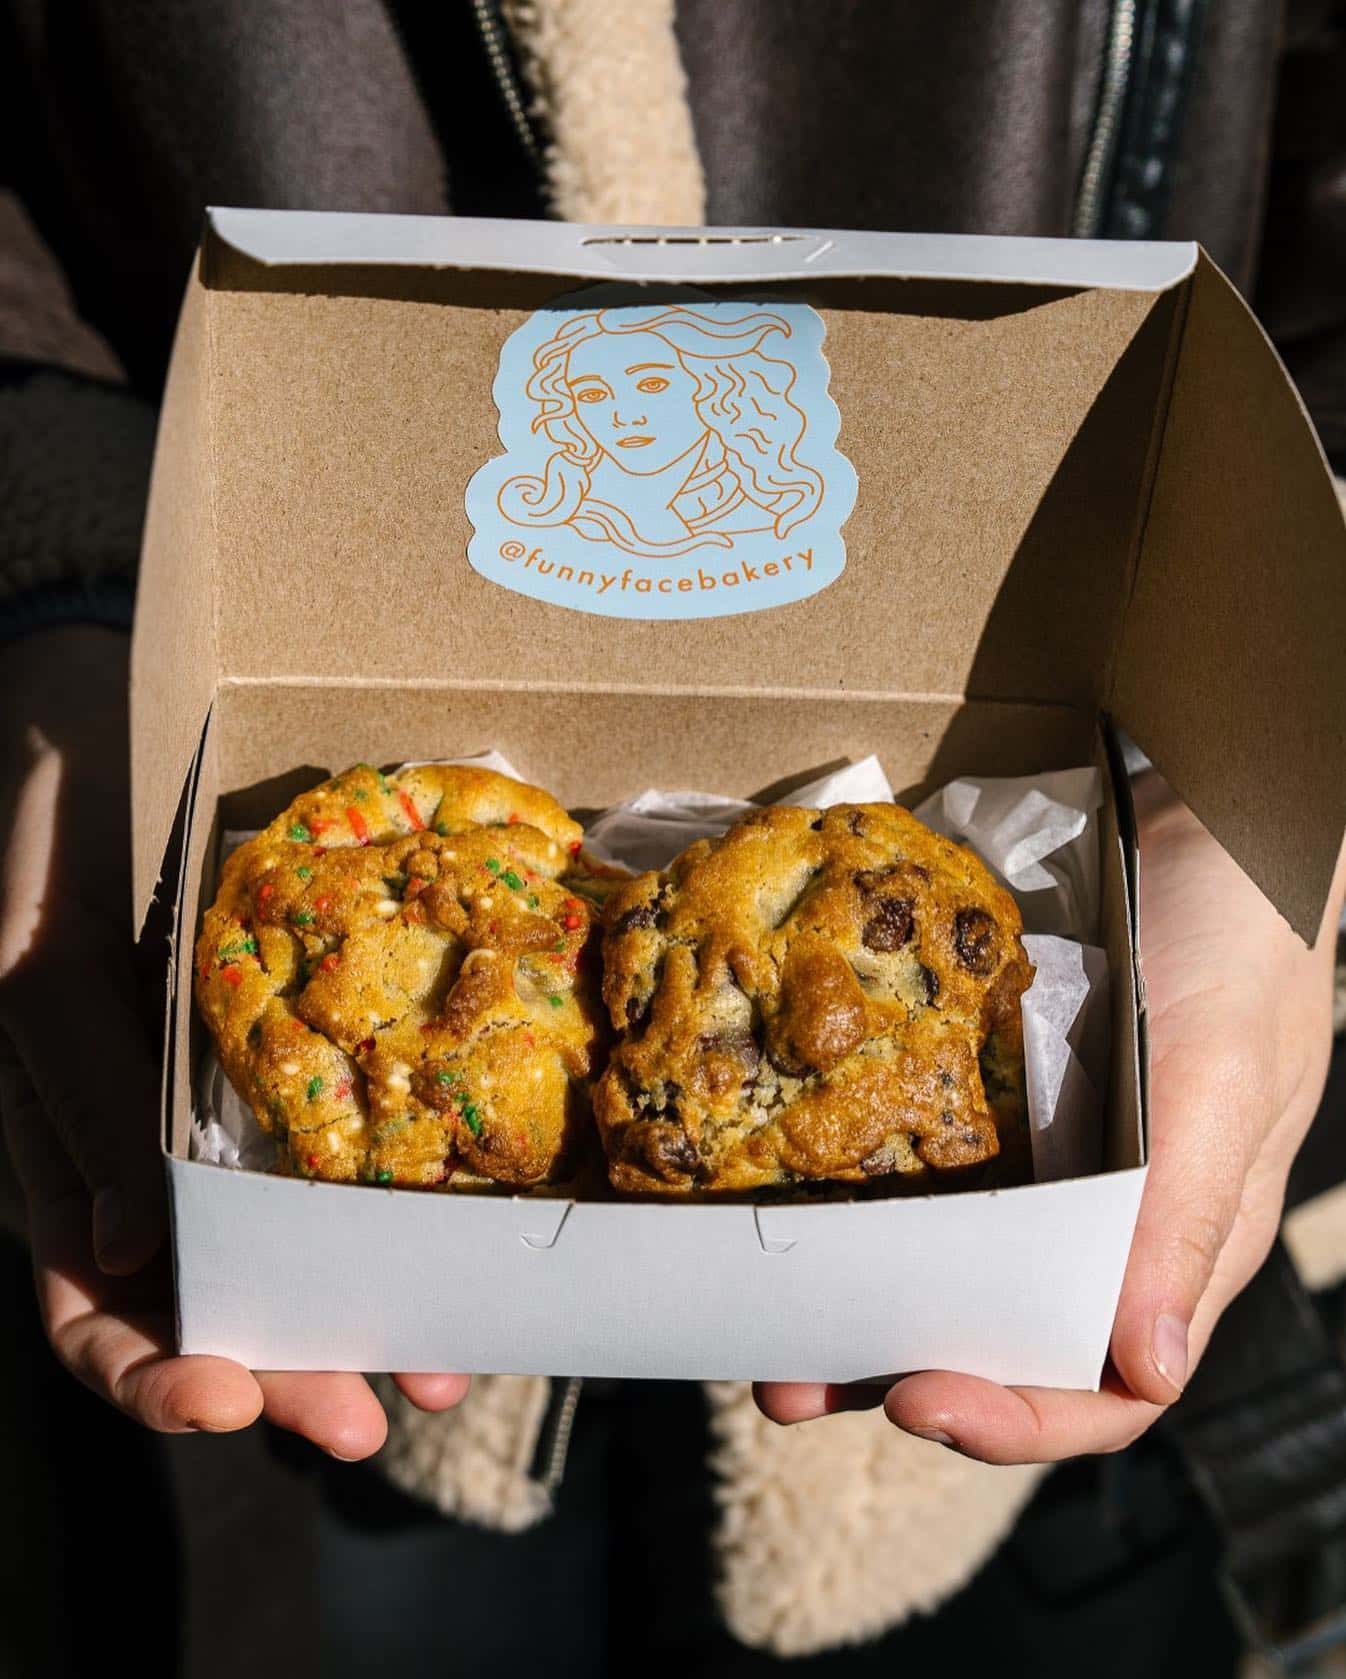 Voted NYC’s best chocolate chip cookie for a reason. Get a taste at @funnyfacebakery. #TheSeaport